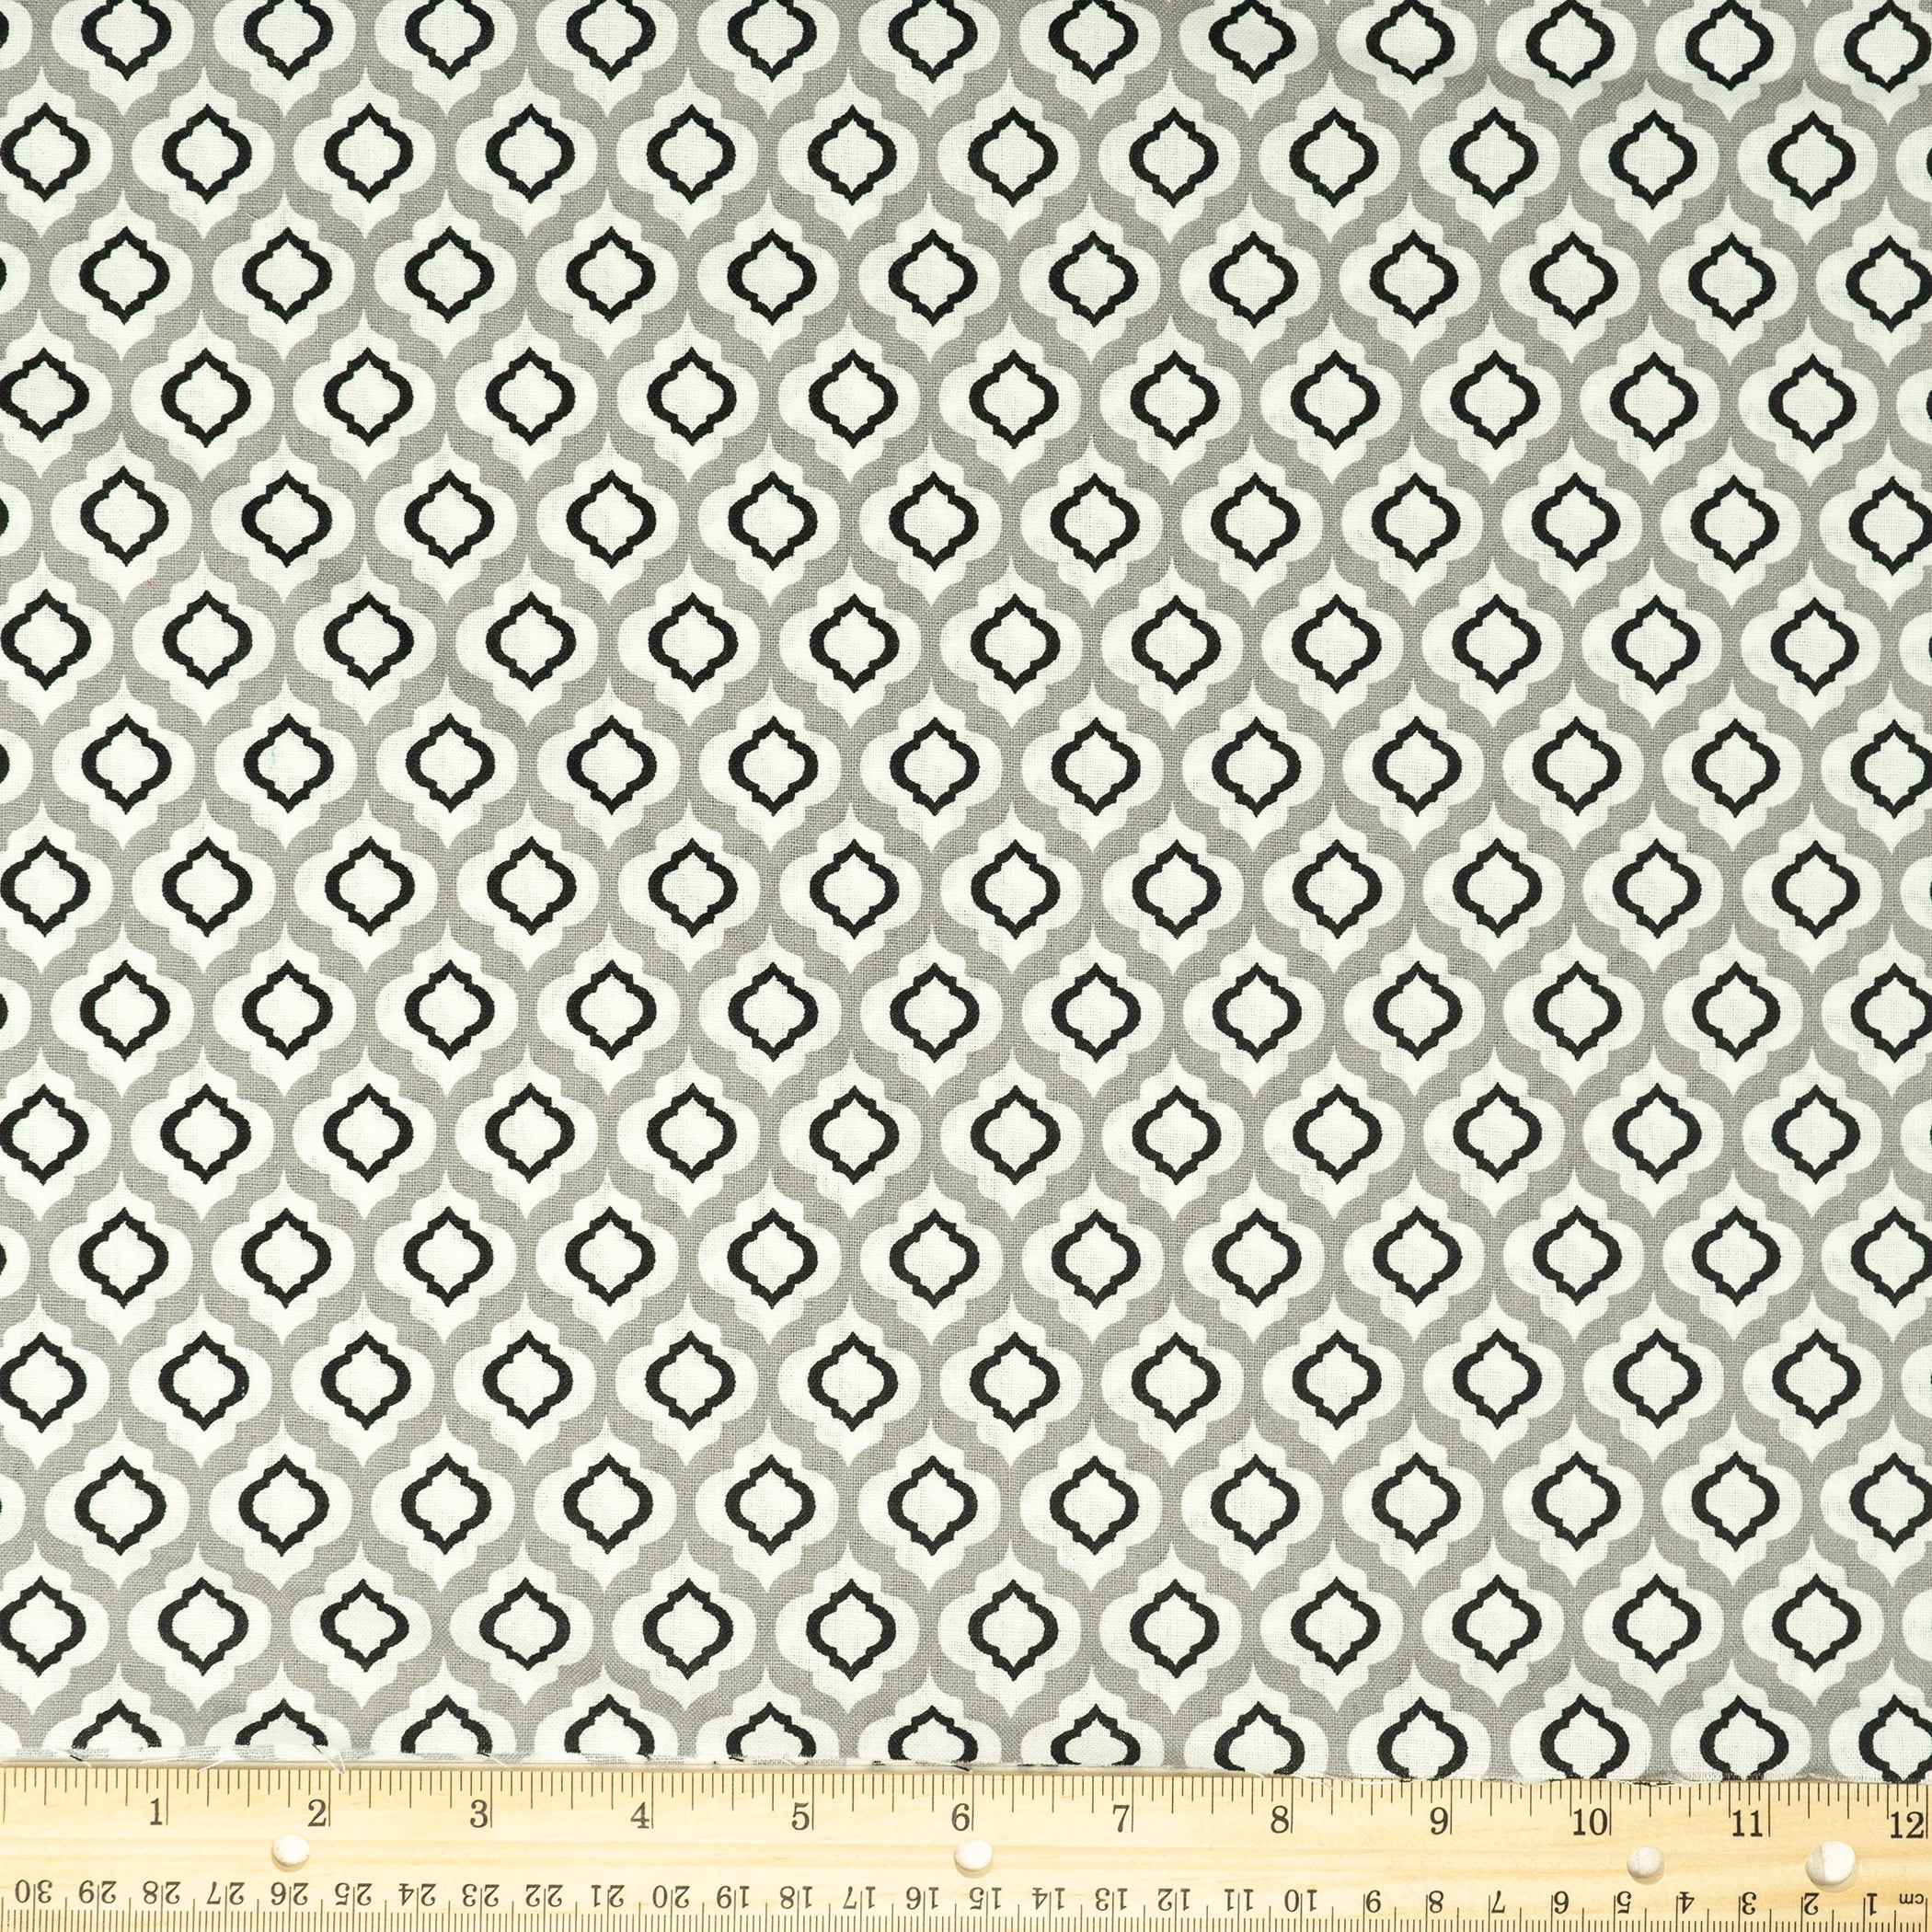 Waverly Inspirations Cotton 44" Raindrop Onyx Color Sewing Fabric by the Yard